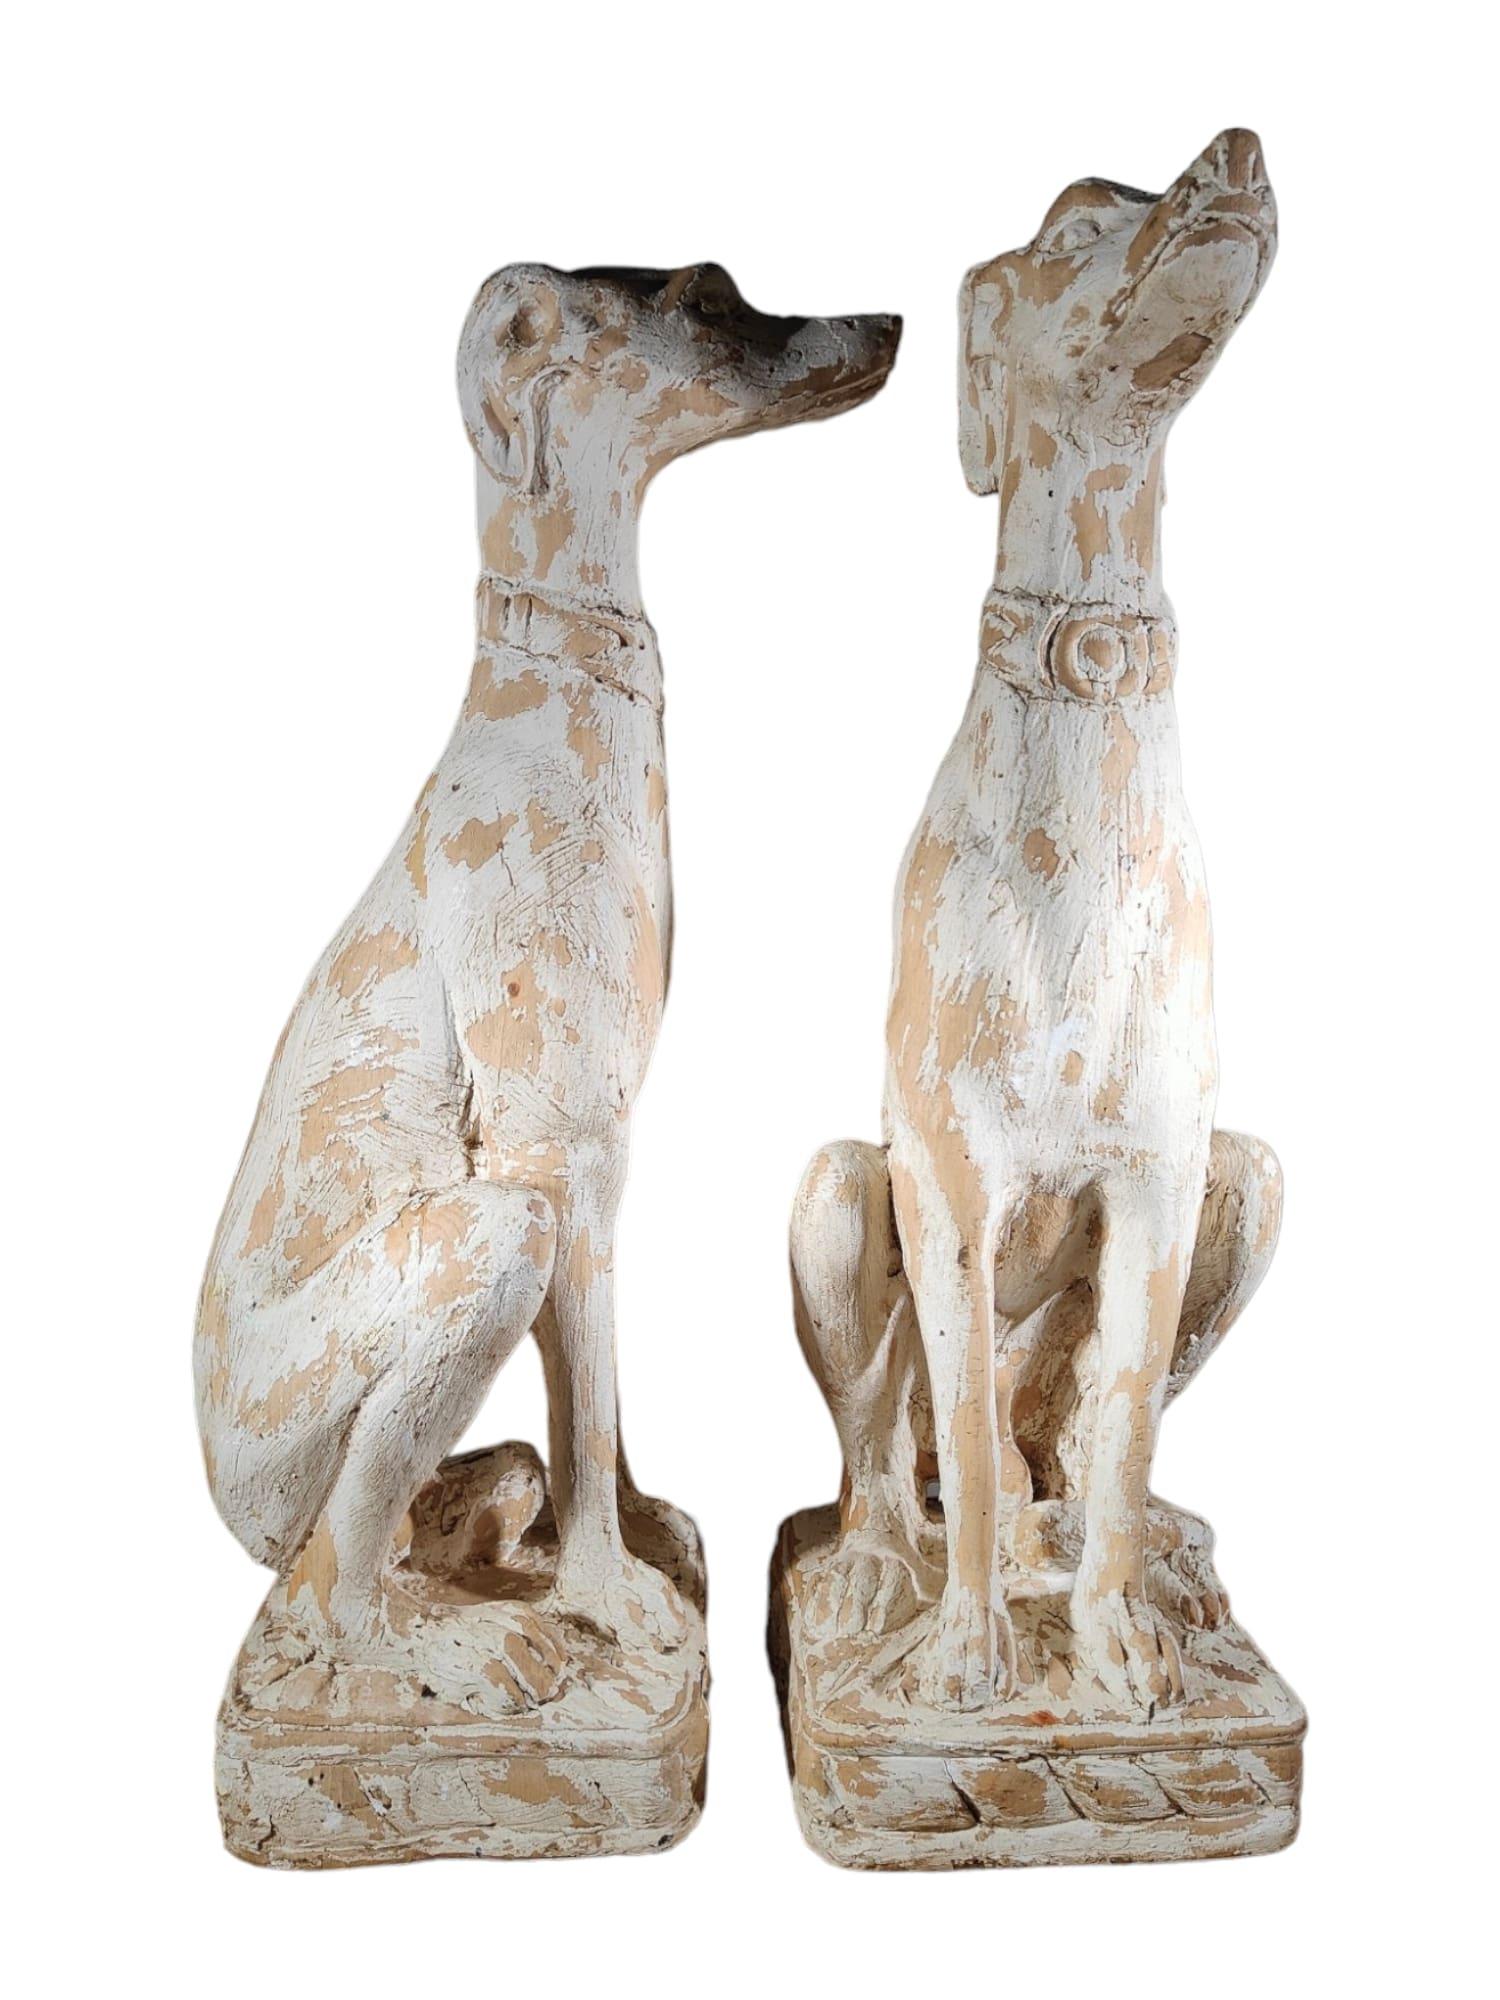 Charming Pair of Italian Greyhounds: Decorative Solid Wood Carved Statues 3